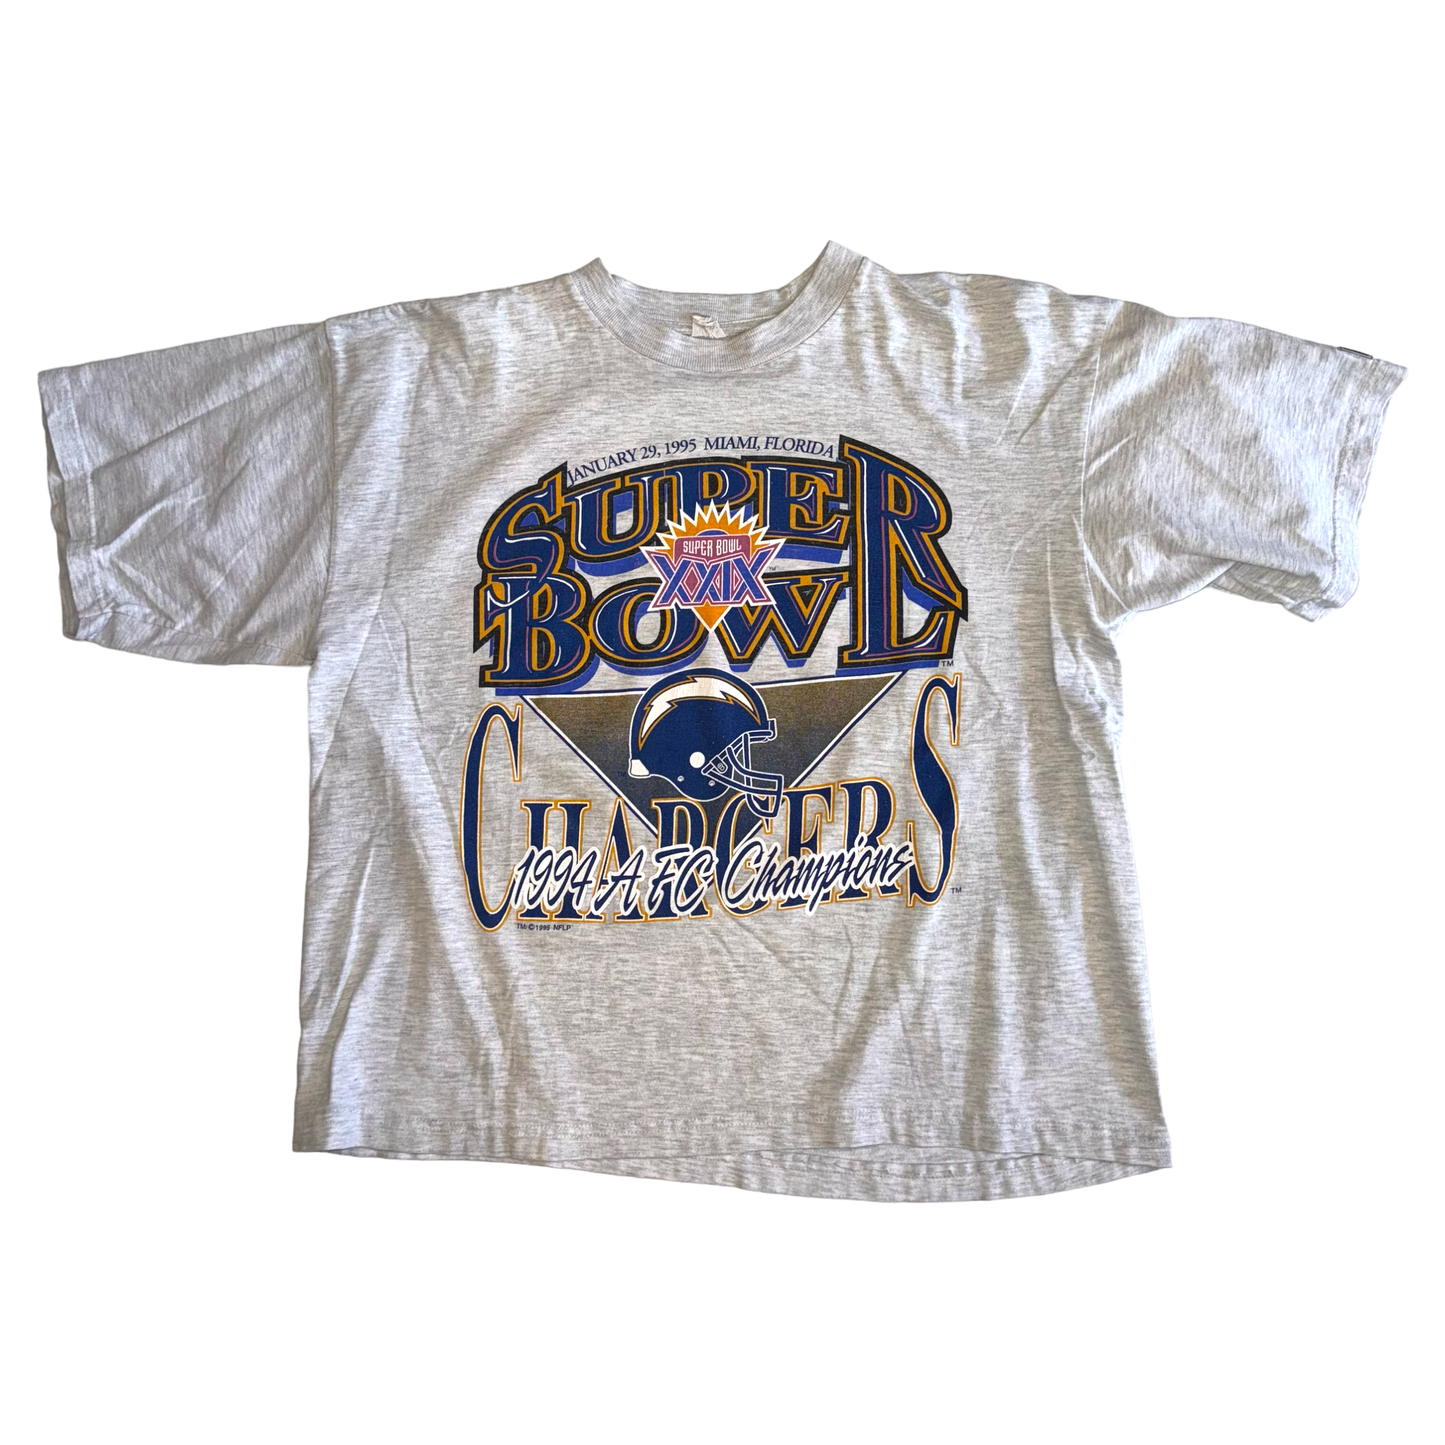 Logo 7 x NFL - Super Bowl 1995 Chargers AFC Cropped T-Shirt